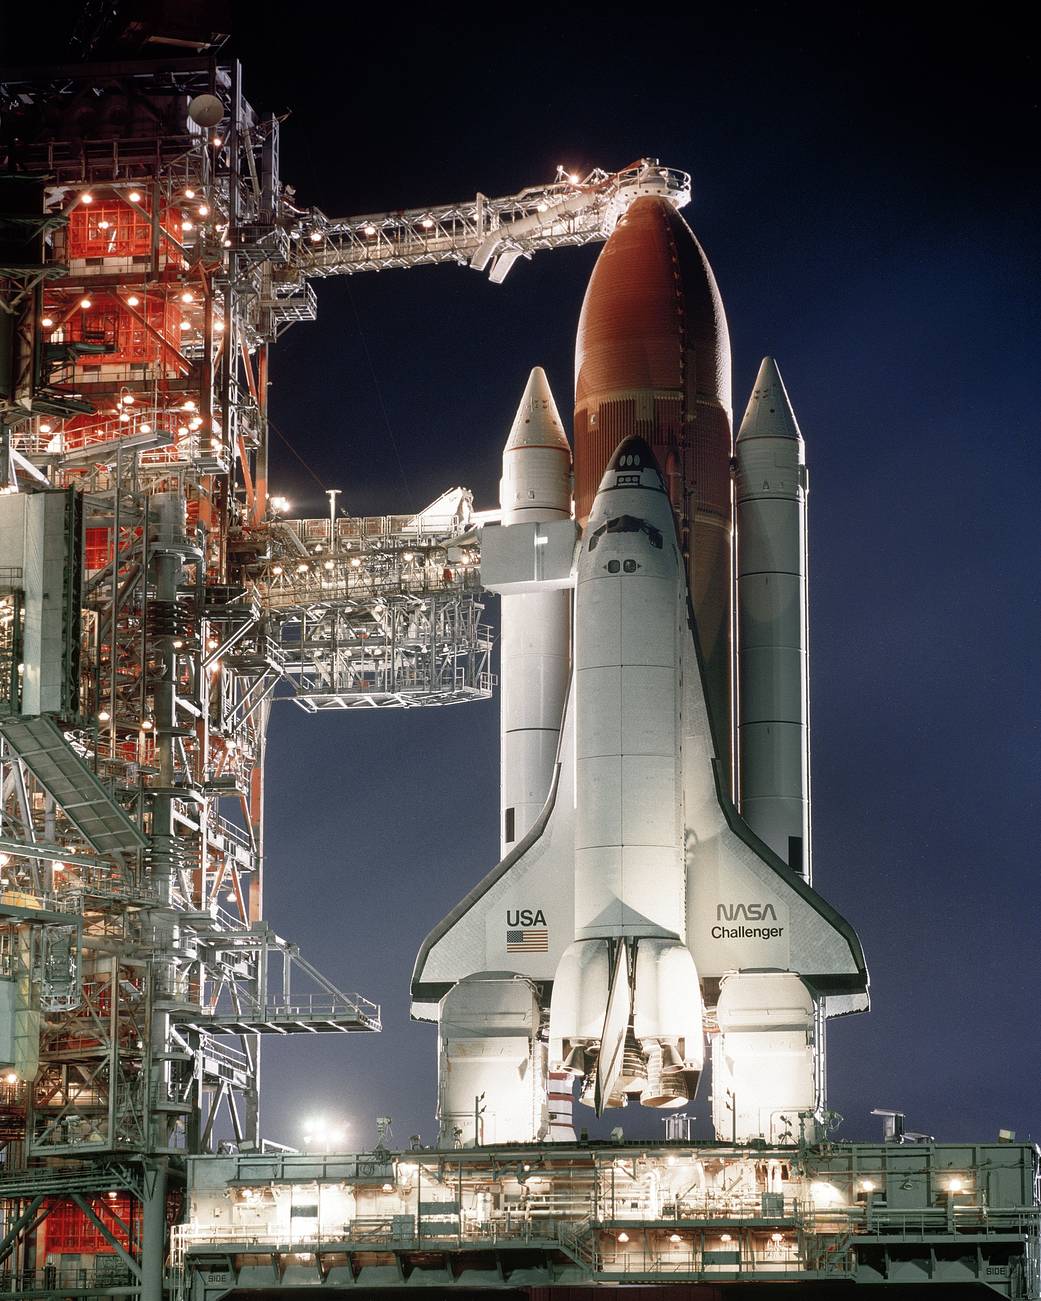 This week in 1984, the space shuttle Challenger, mission STS-41B, landed safely at NASA’s Kennedy Space Center.